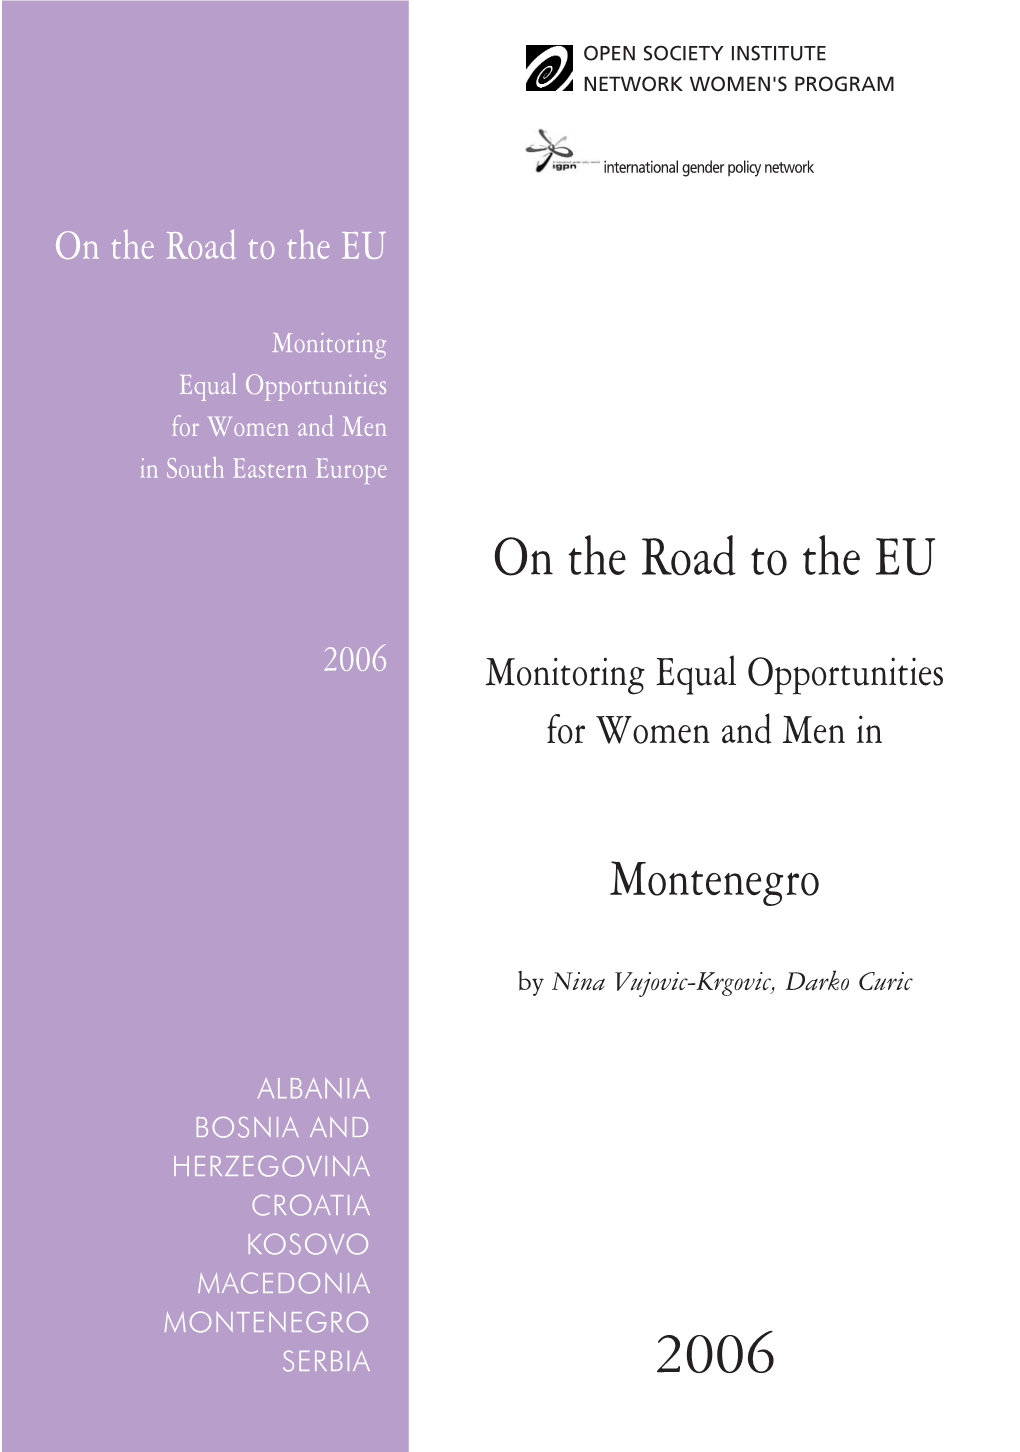 On the Road to the EU: Monitoring Equal Opportunities for Women And